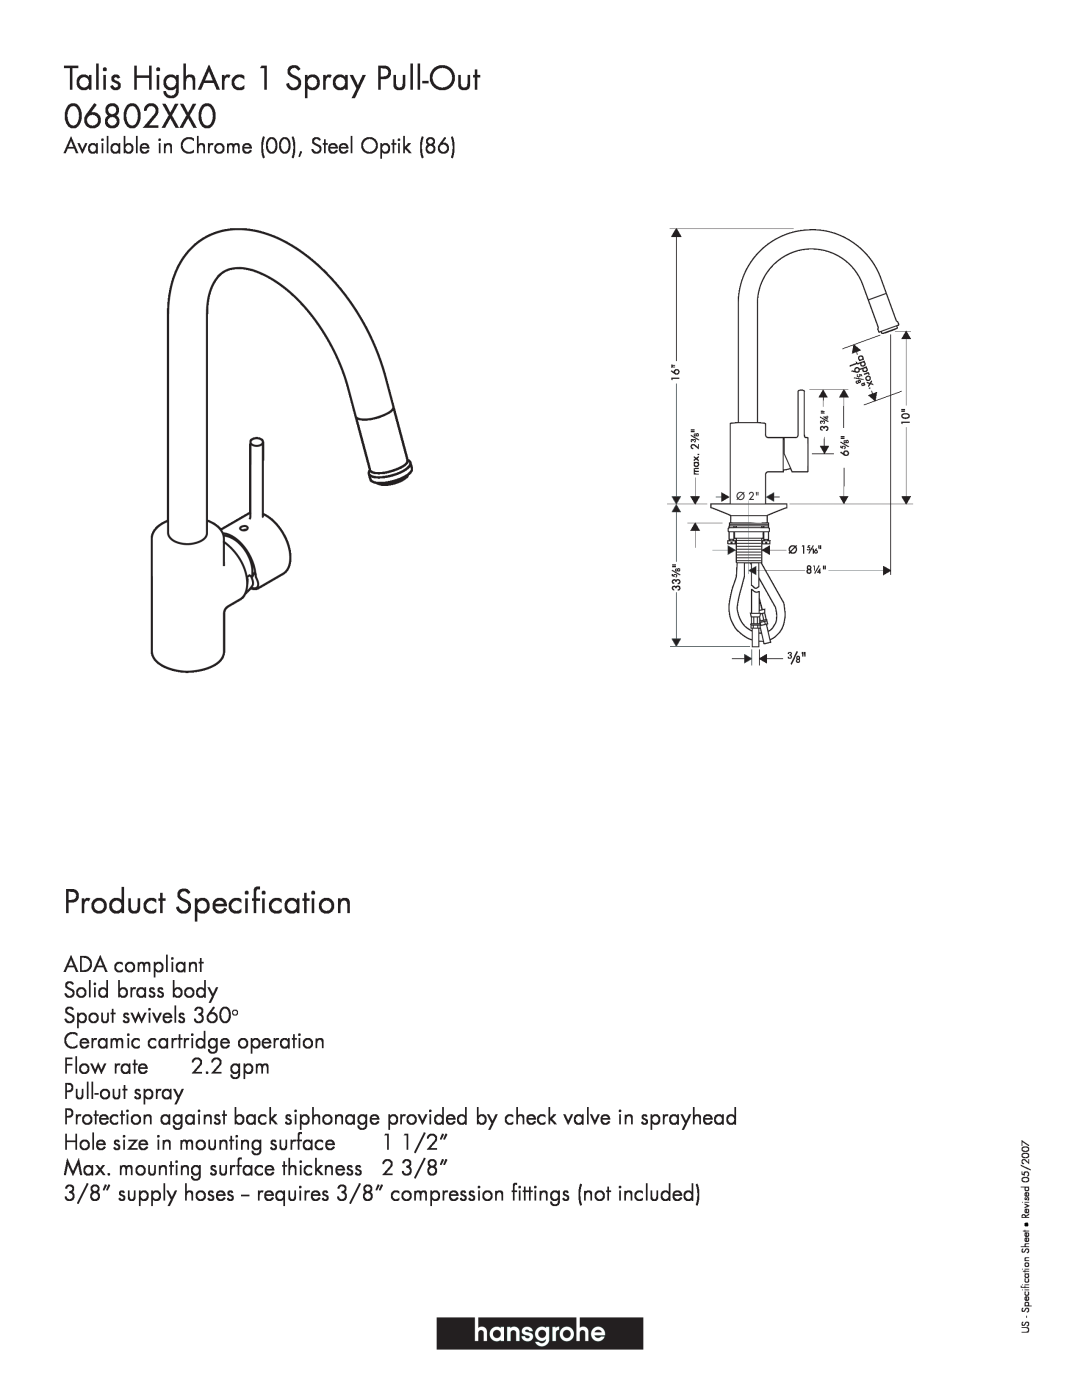 Hans Grohe 06802XX0 specifications Talis HighArc 1 Spray Pull-Out, Product Specification 